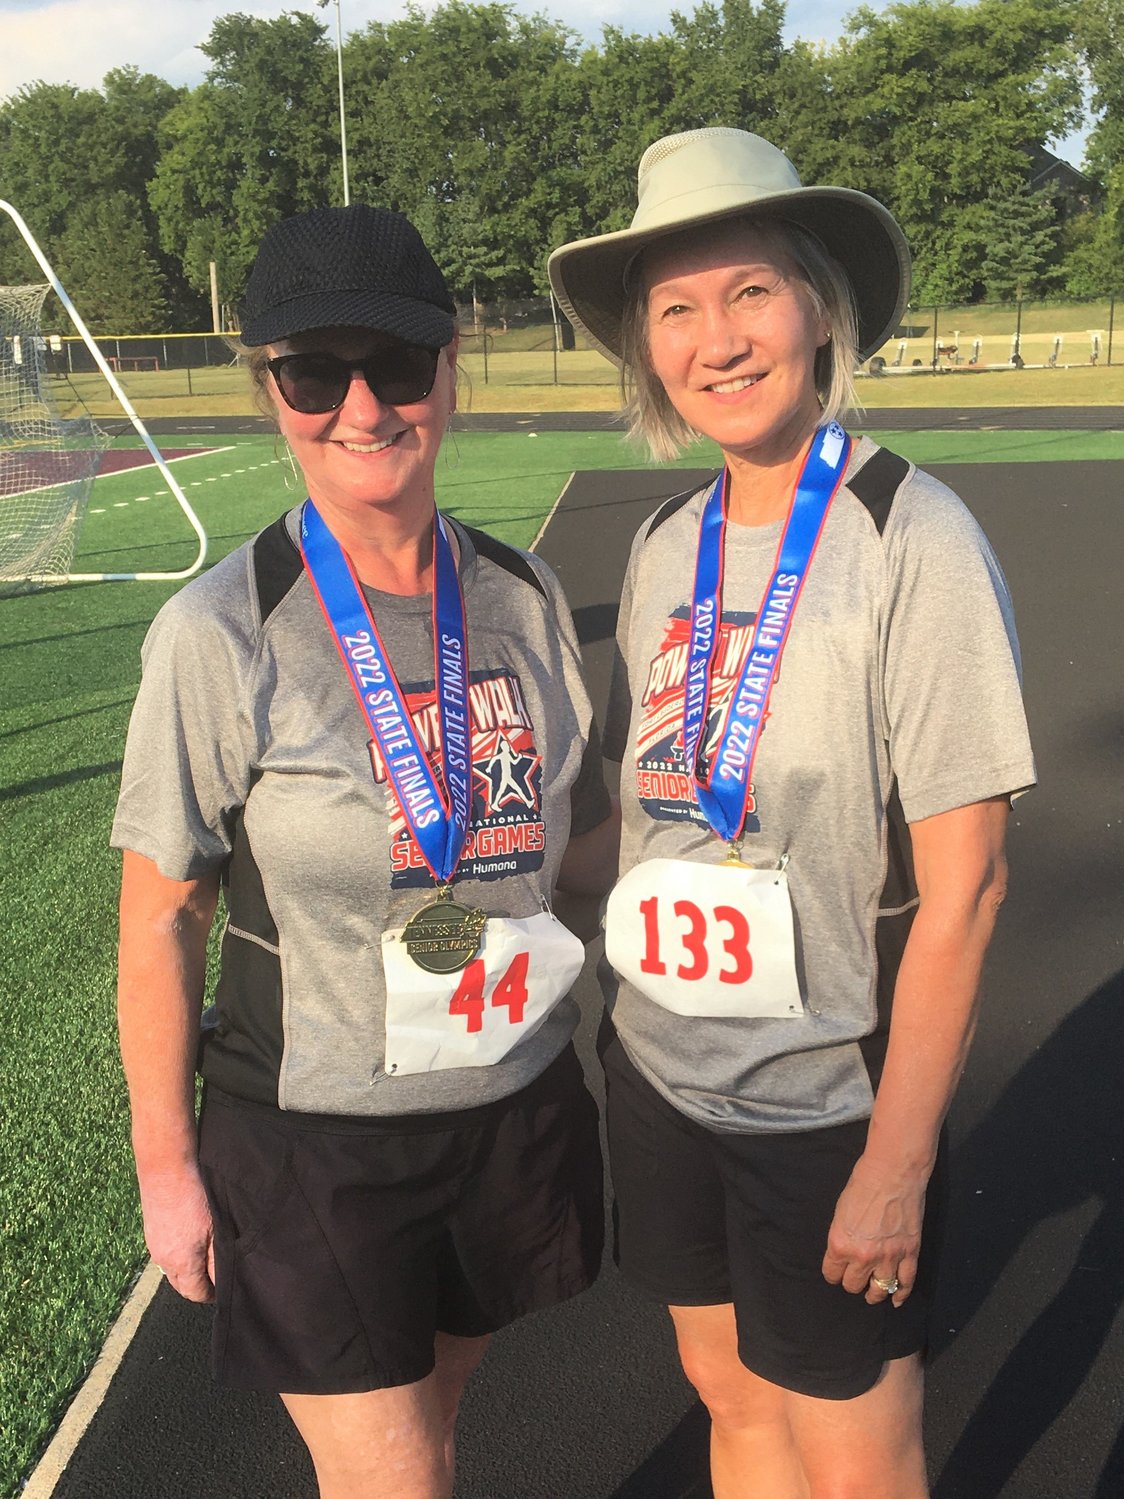 Annette Fenech (left) and Kathy Smith recently competed in the Tennessee Senior Olympics and took home gold medals during their power walk events.